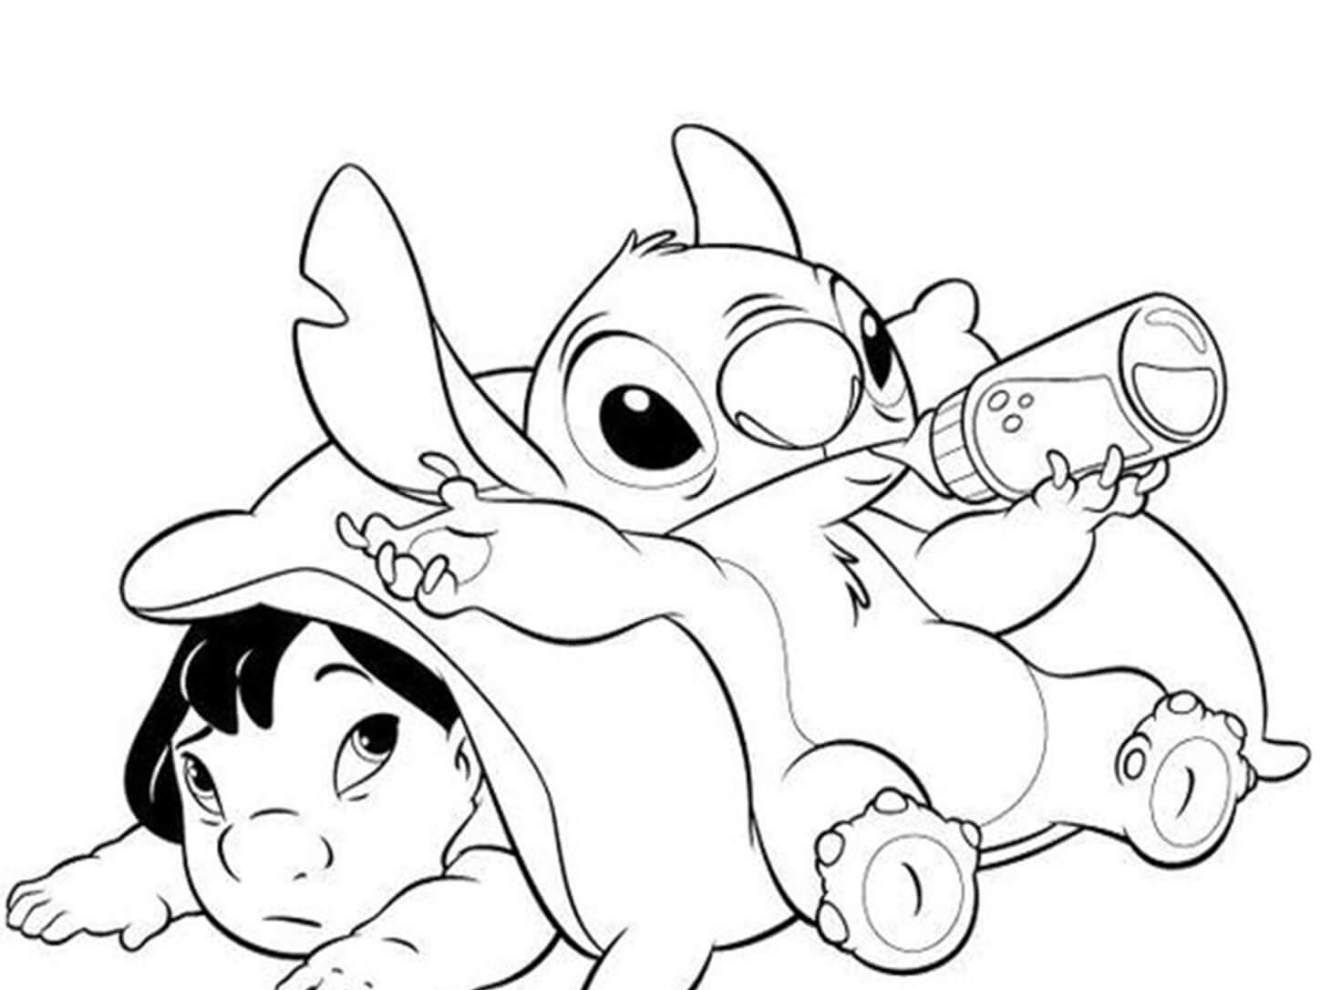 Pin on Stitch coloring pages